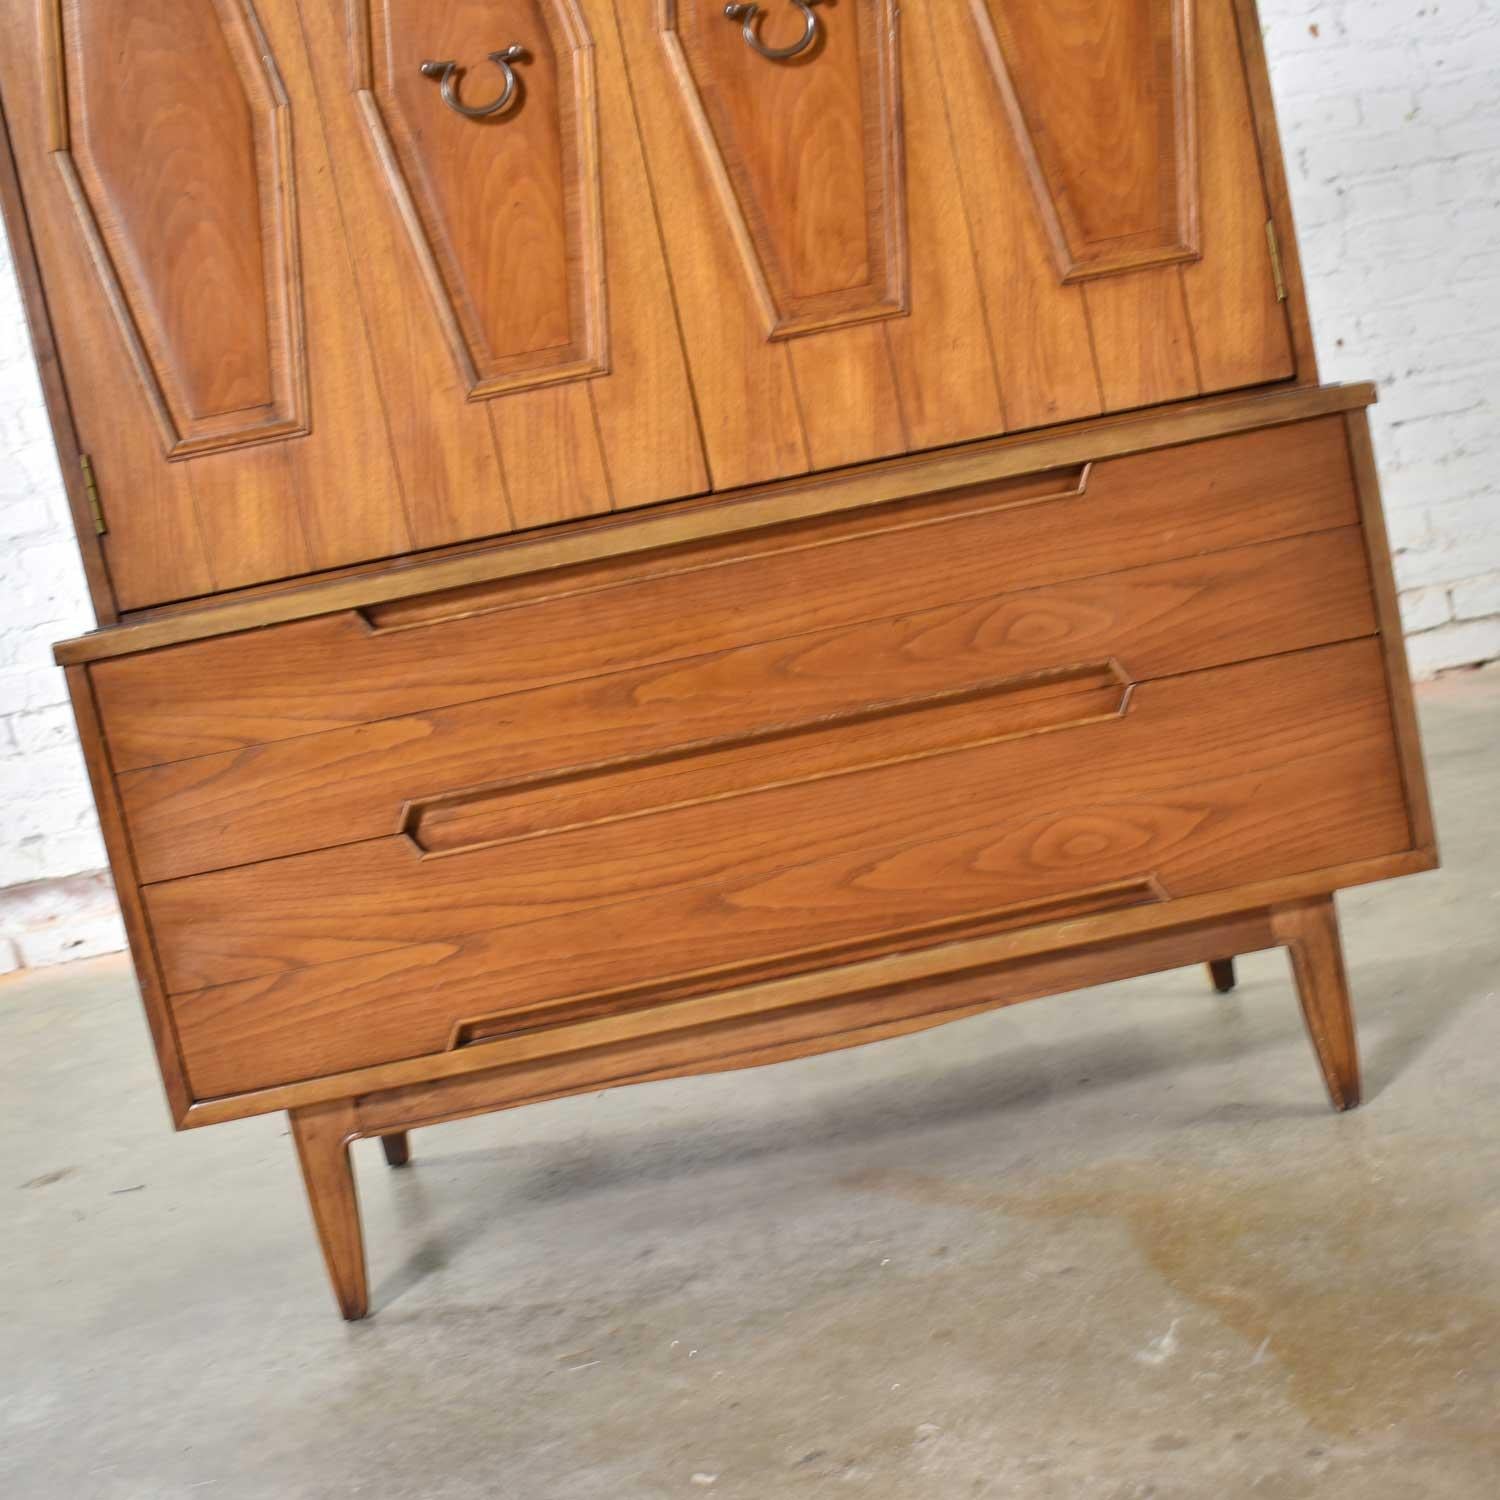 20th Century Midcentury Gentlemen’s Chest with Hexagon Paneled Design and Brass Hardware For Sale